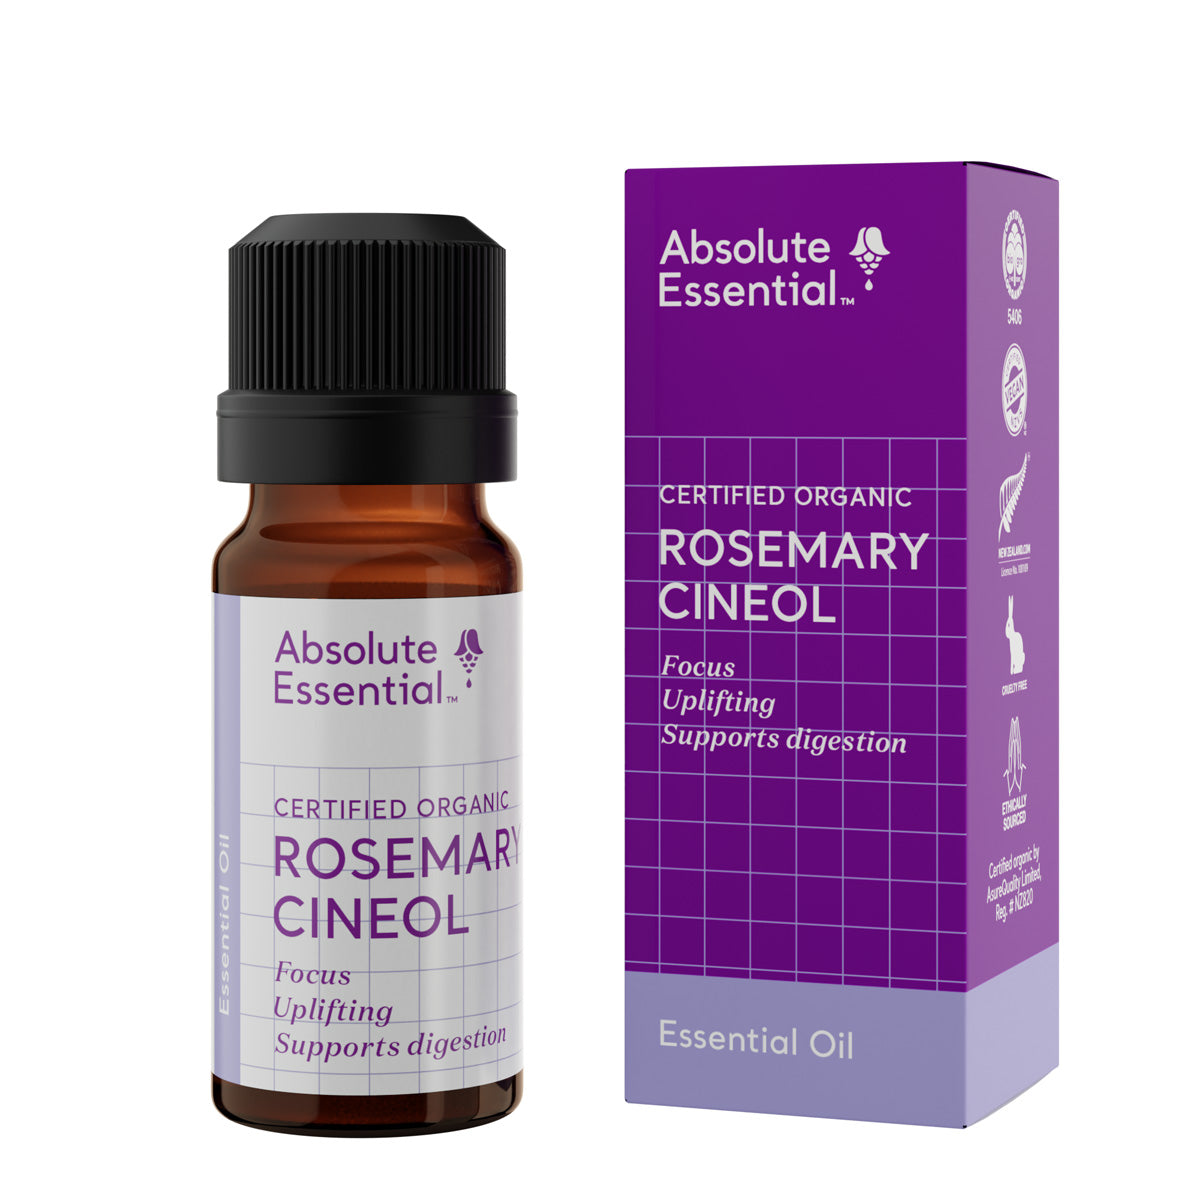 Absolute Essential Rosemary Cineol